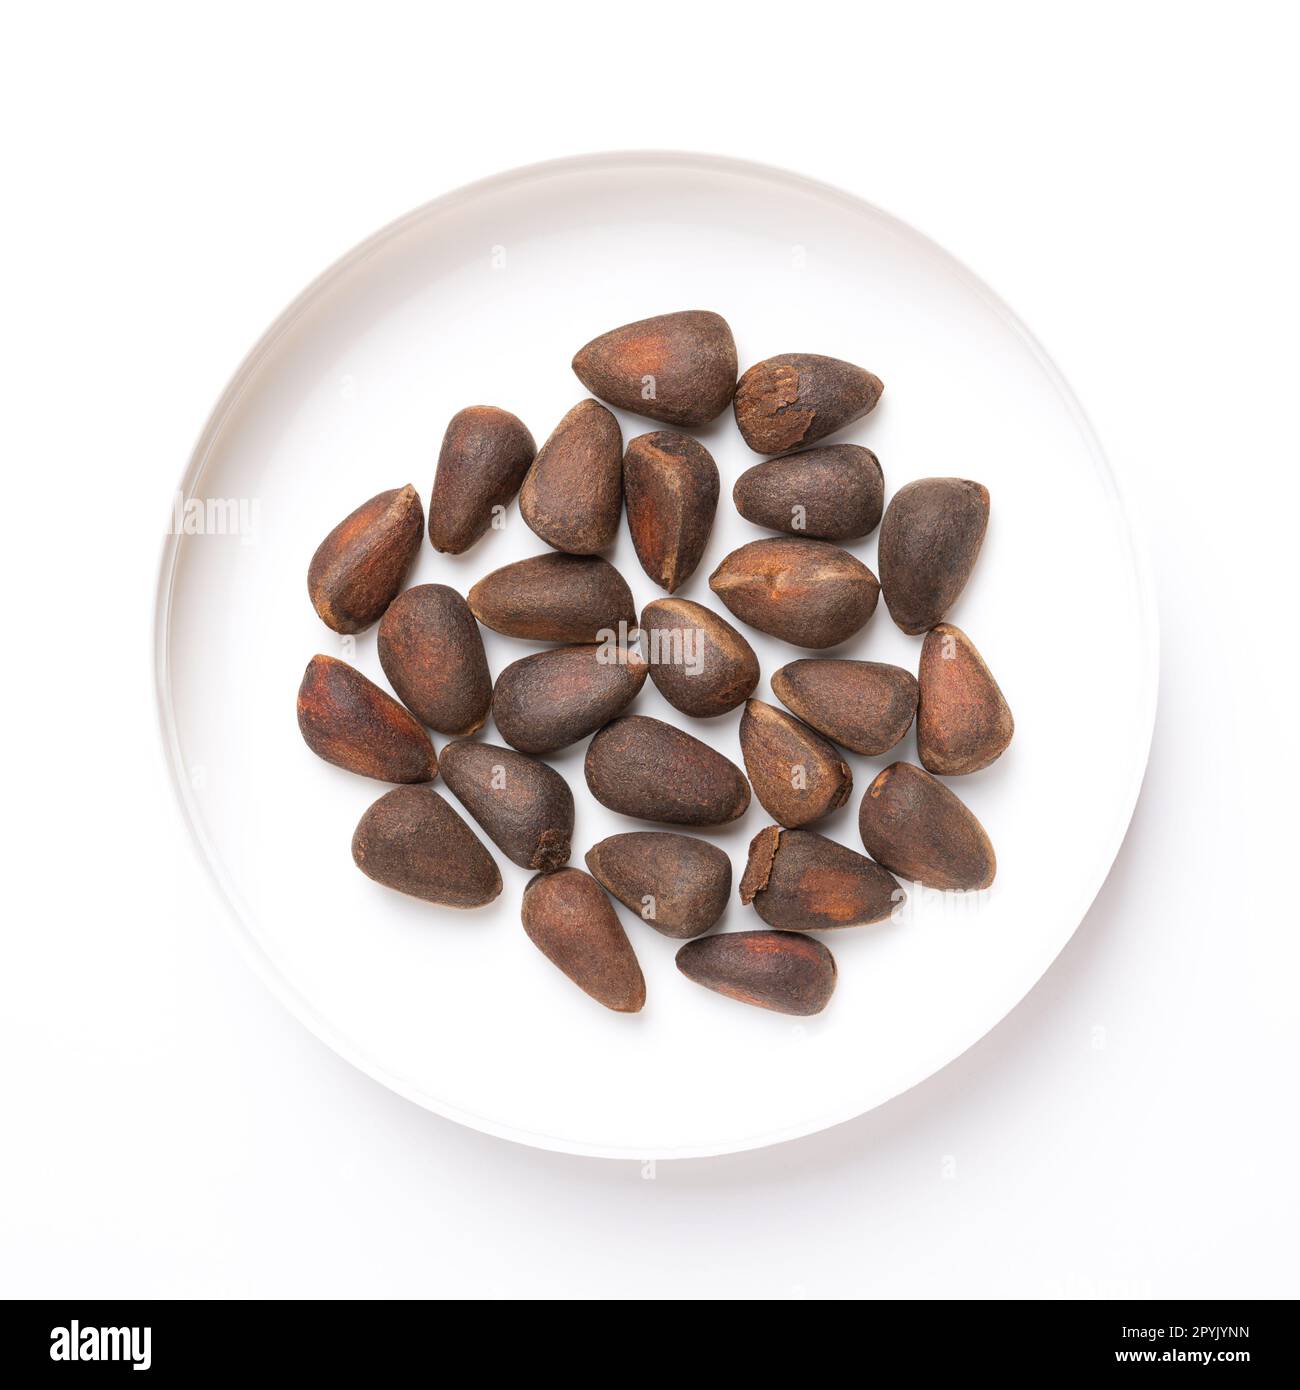 Seeds of a stone pine, Nuts from a cone of Pinus cembra, from above Stock Photo